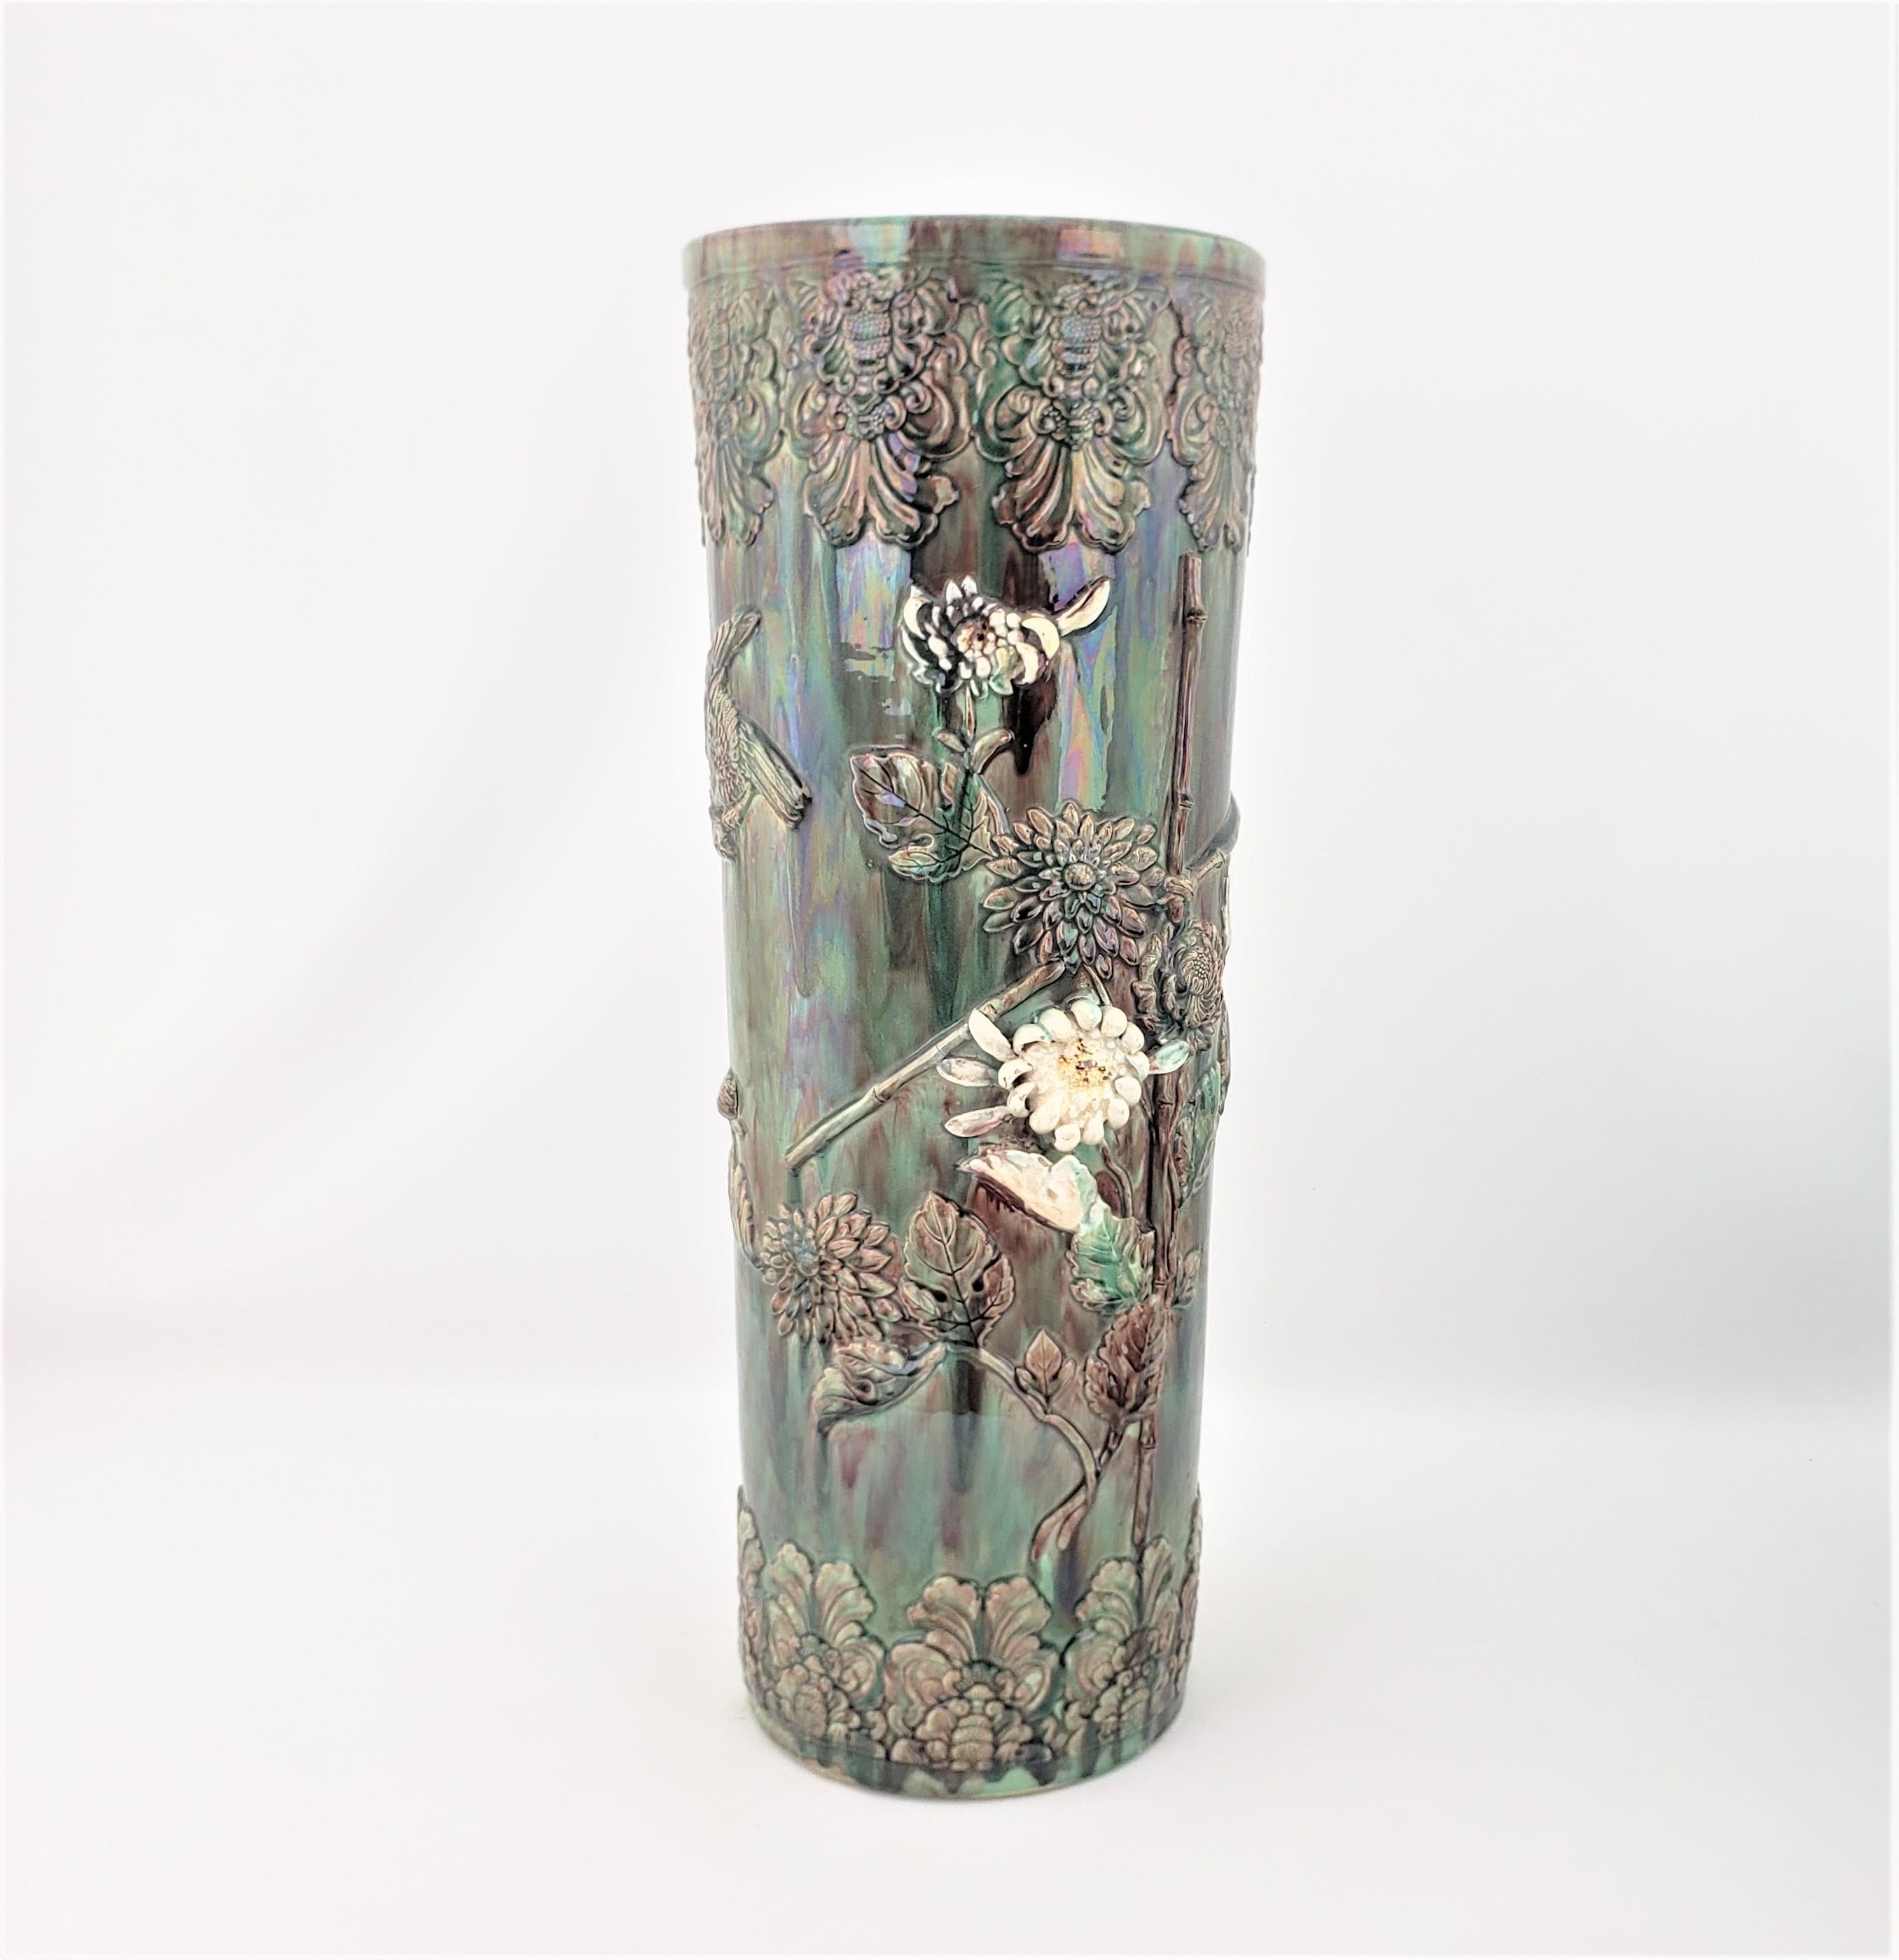 This antique umbrella stand is unsigned, but presumed to have originated from Asia, most likely China, and dating to approximately 1900 and done in a period Export style. This hand-crafted umbrella stand is done in a vibrant lead glaze using a mix